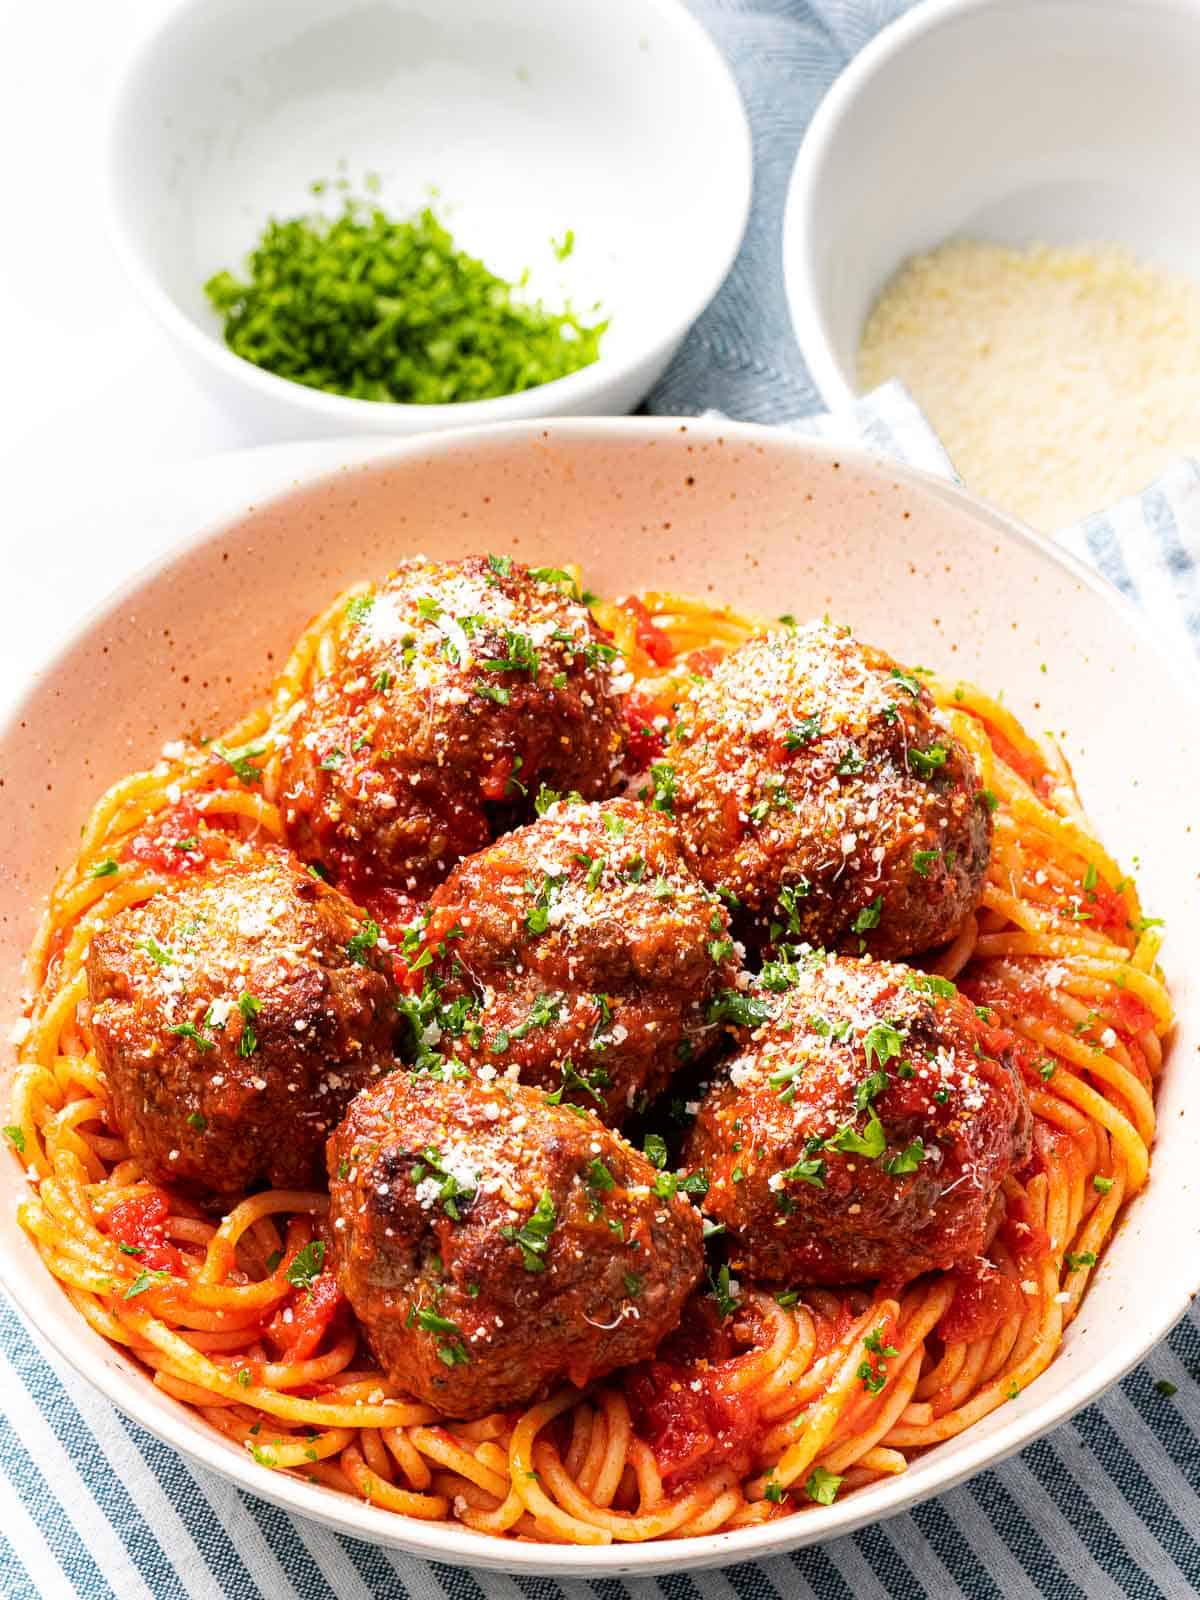 Italian meatballs with spaghetti next to parmesan cheese and parsley.